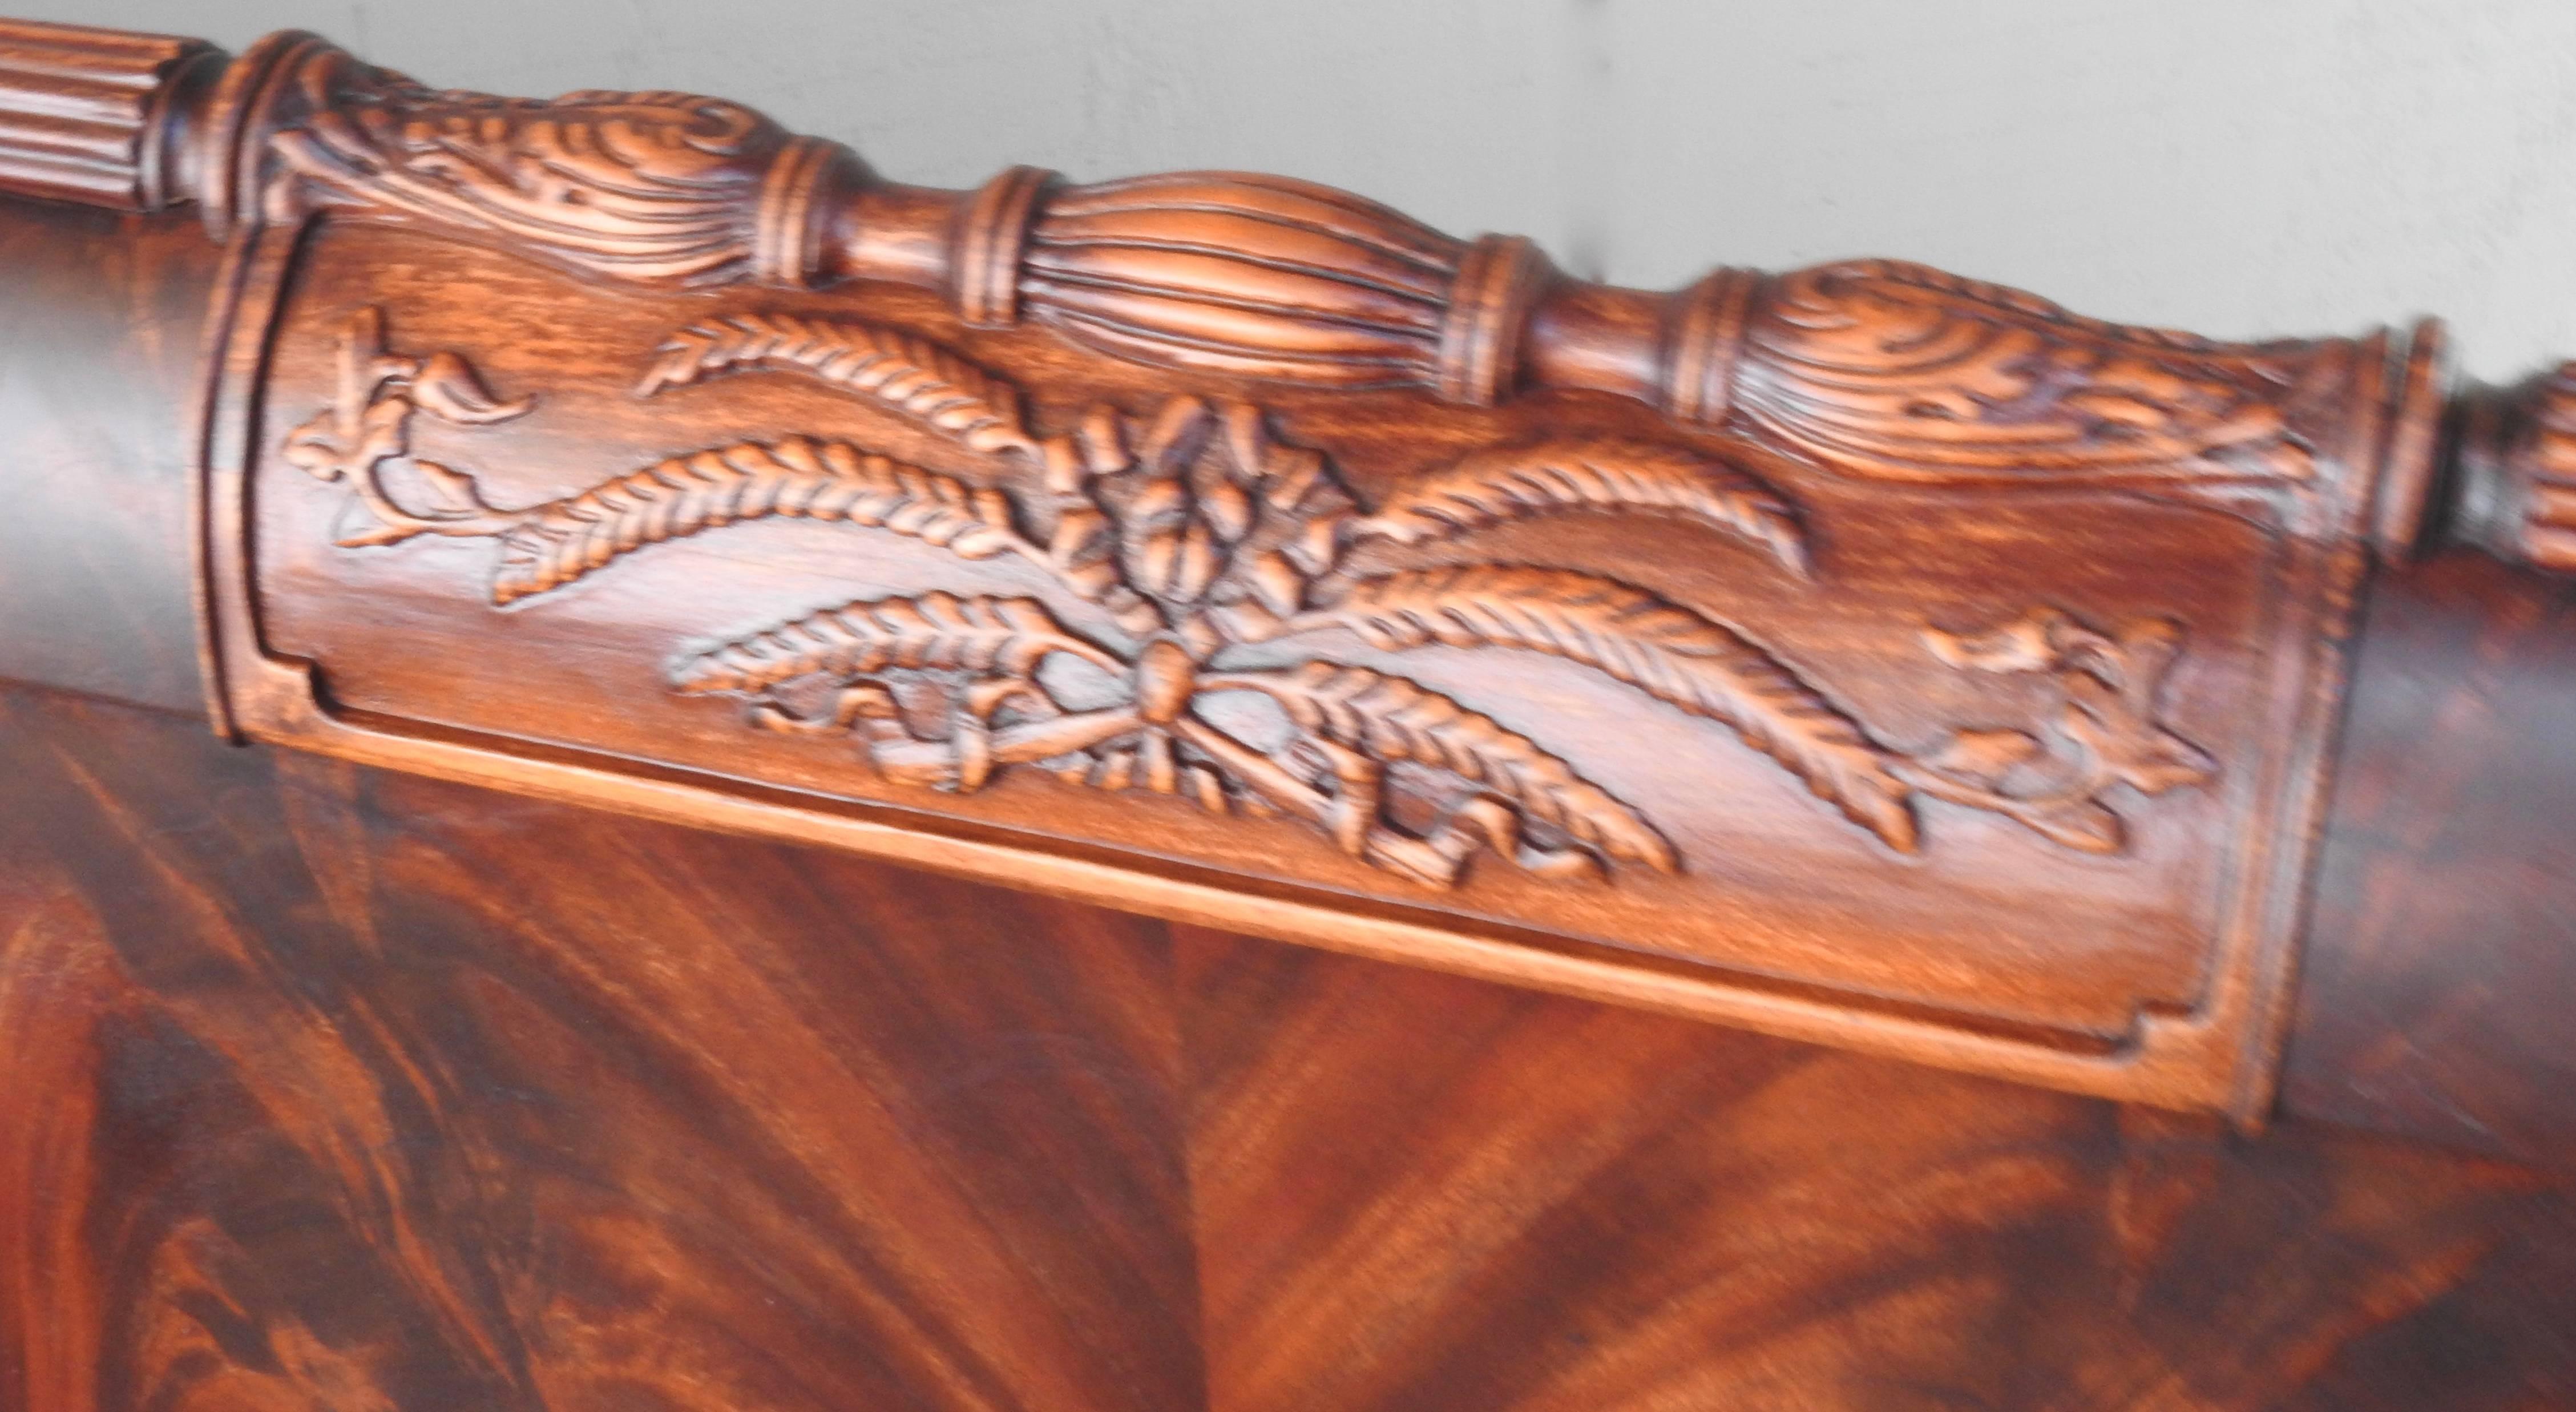 Carved Early 20th Century, Flame Mahogany Bed & Rails